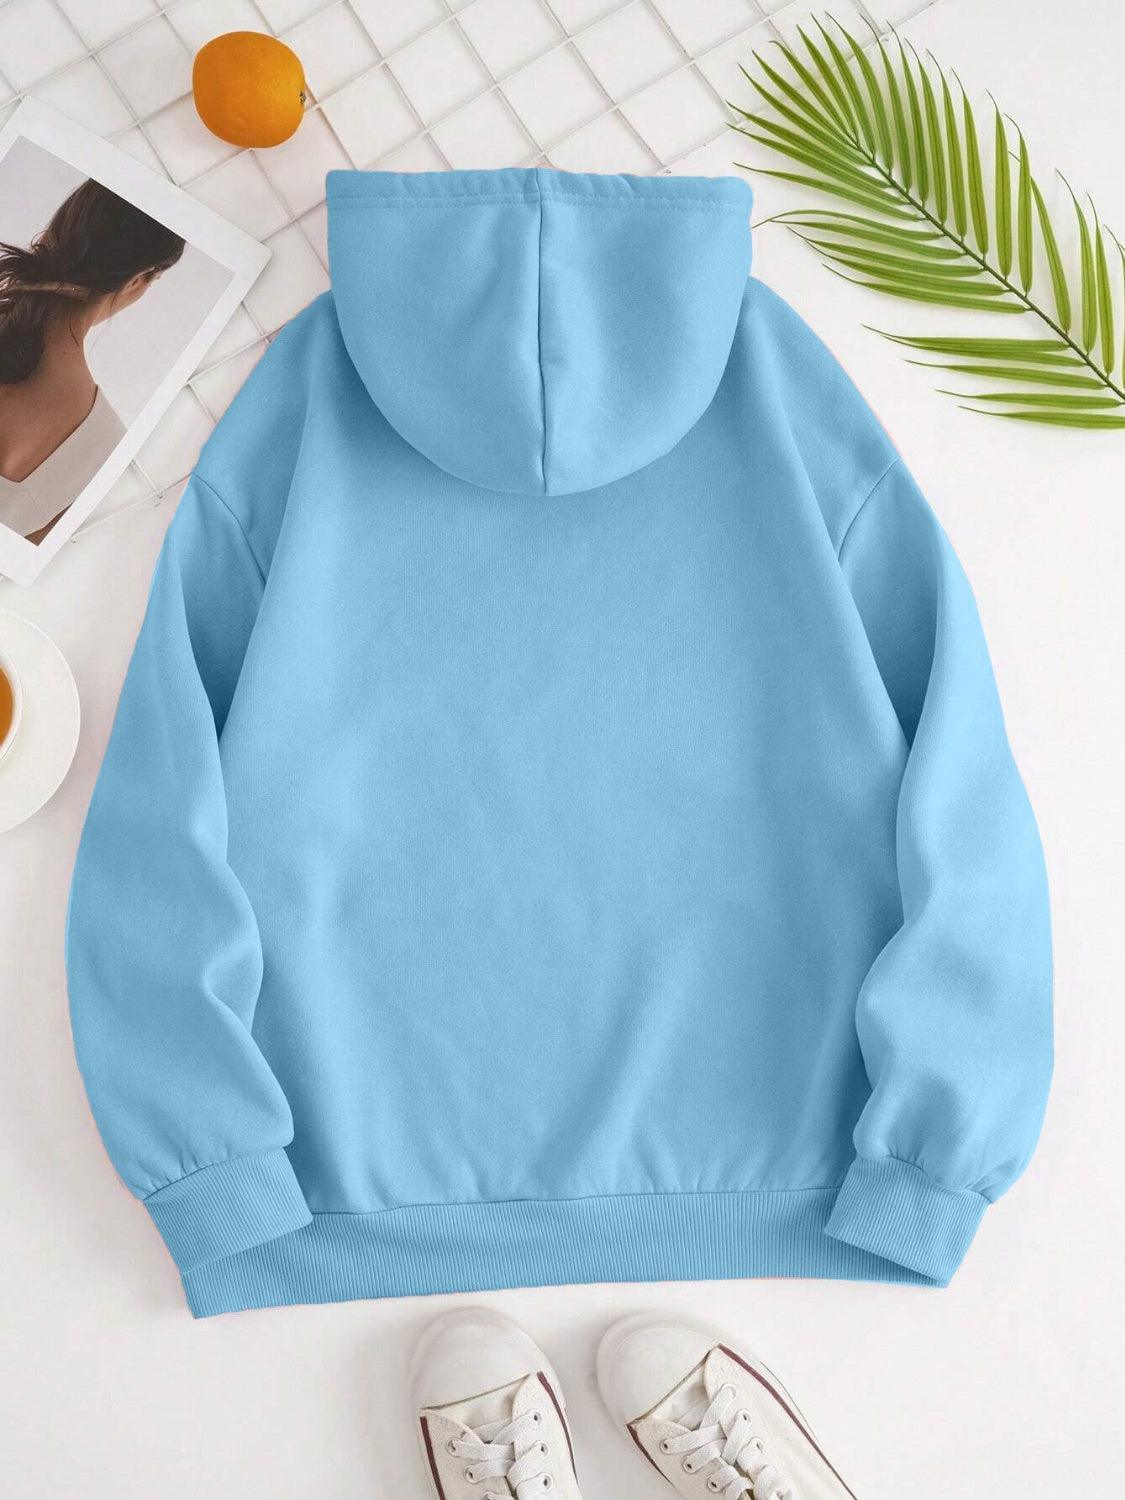 a blue hoodie with a pair of white shoes next to it